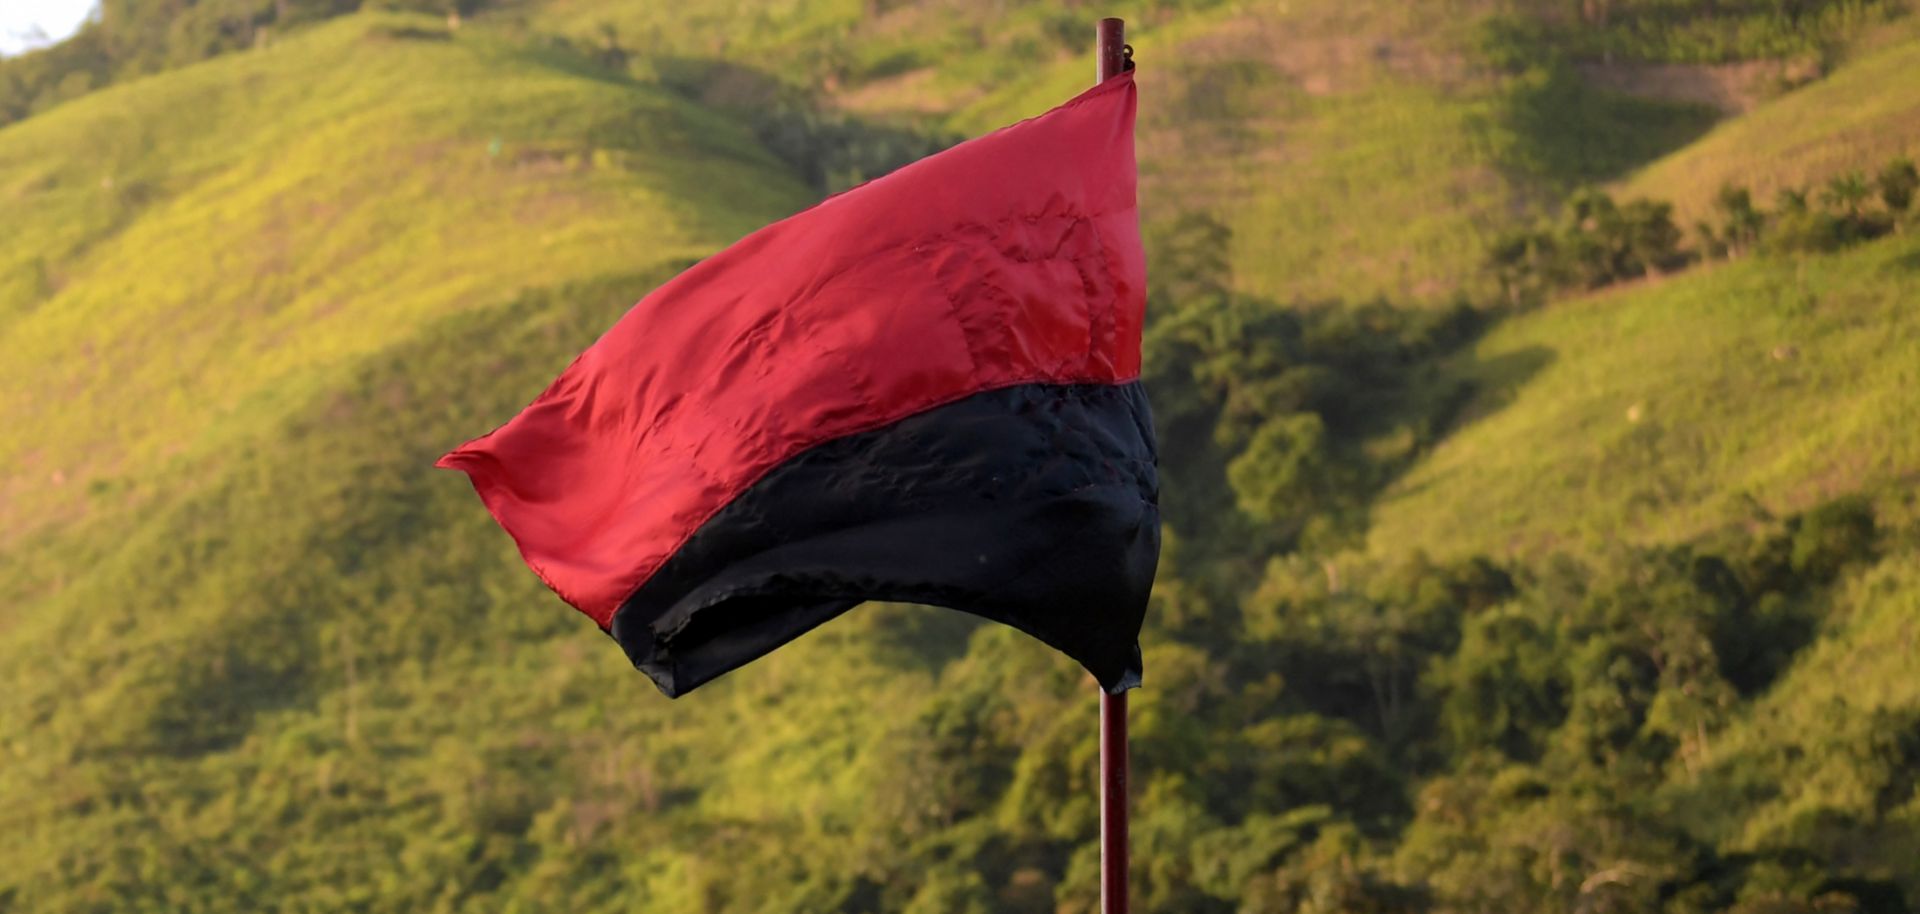 A flag of the National Liberation Army (ELN) guerrilla group flutters in the wind in Catatumbo, Colombia, on Aug. 18, 2022. 